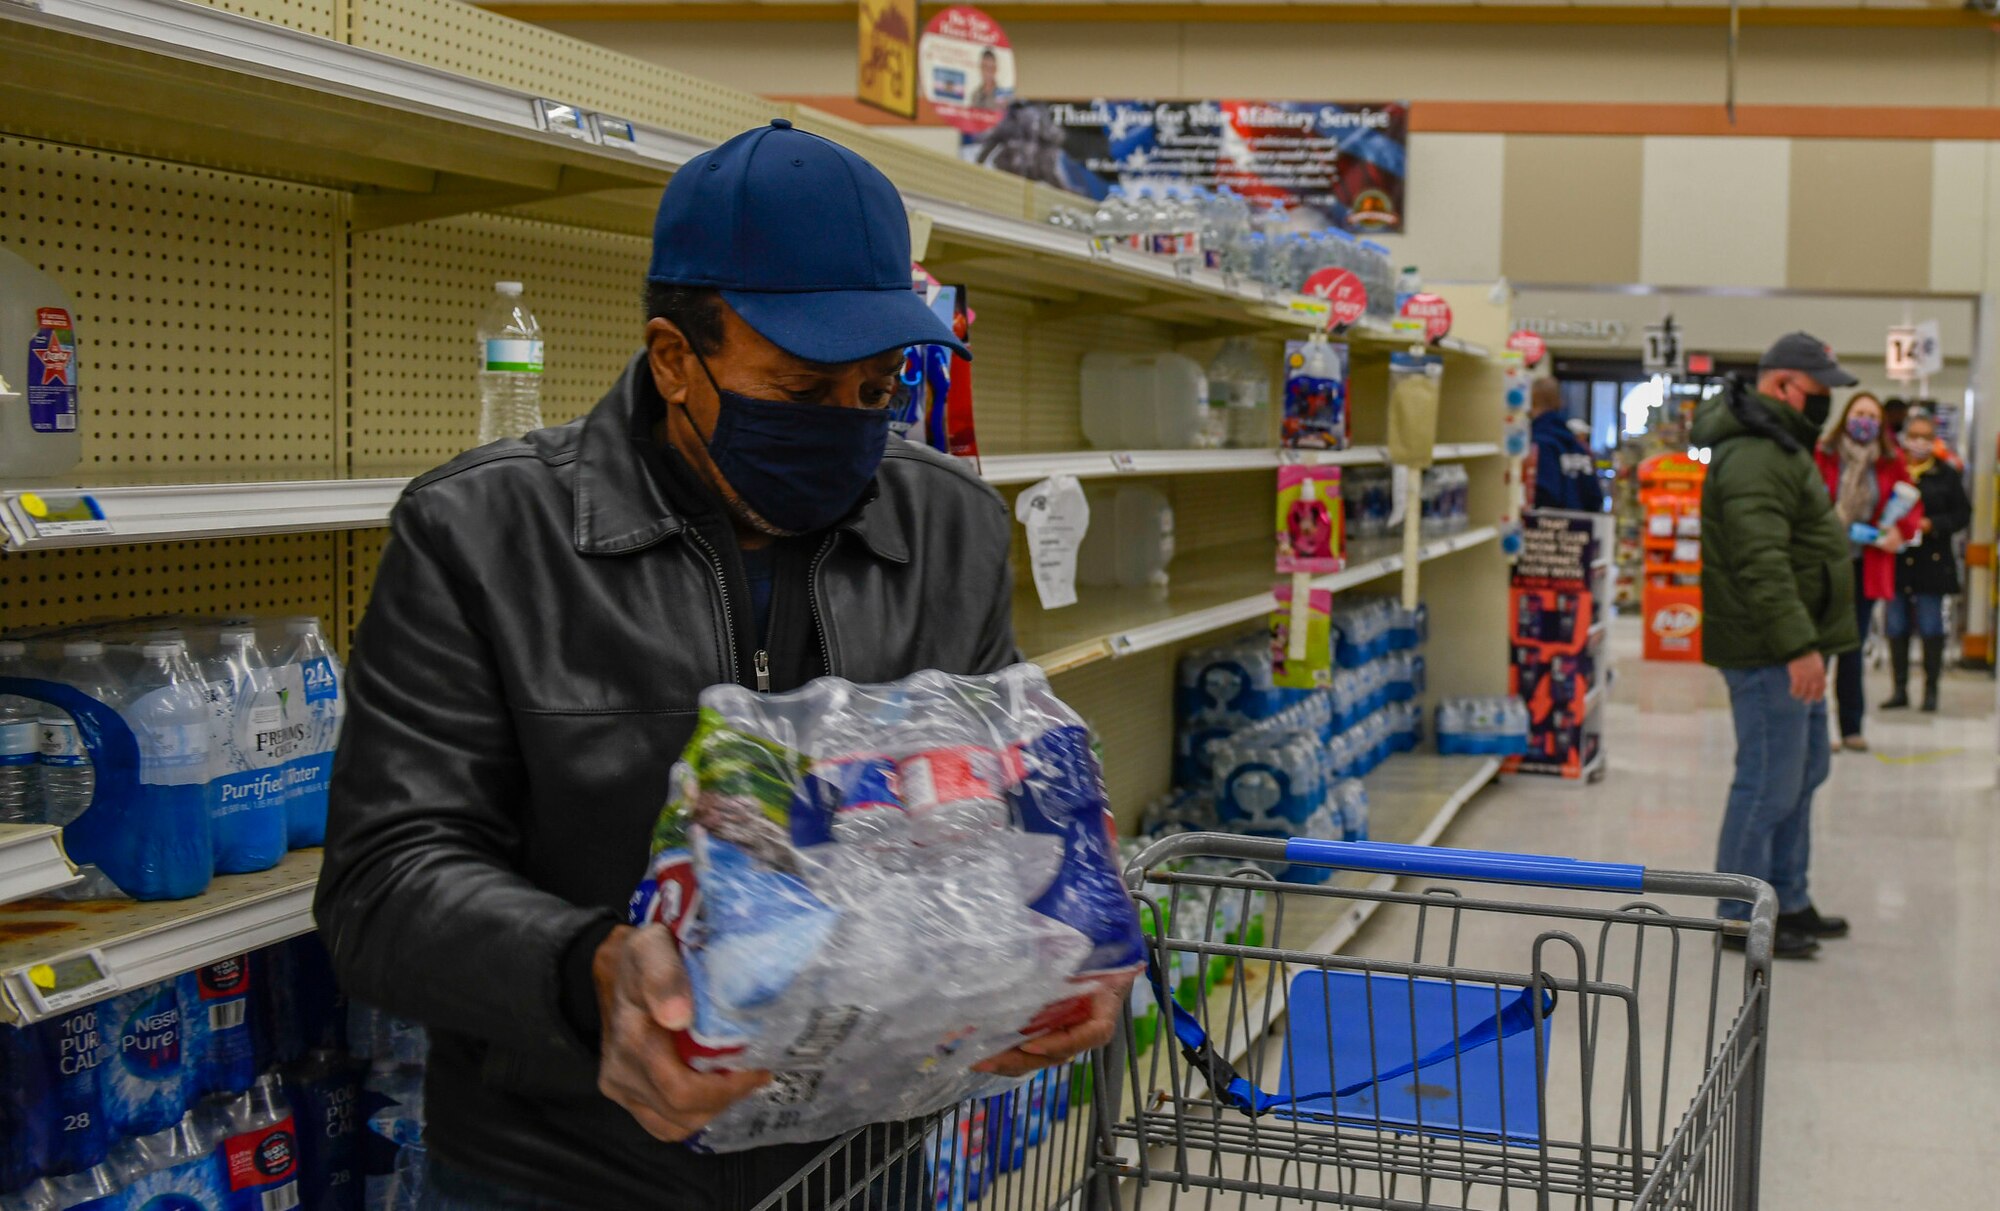 A commissary patron puts water in his cart at the Joint Base San Antonio-Randoph Commissary Feb. 19, 2021.